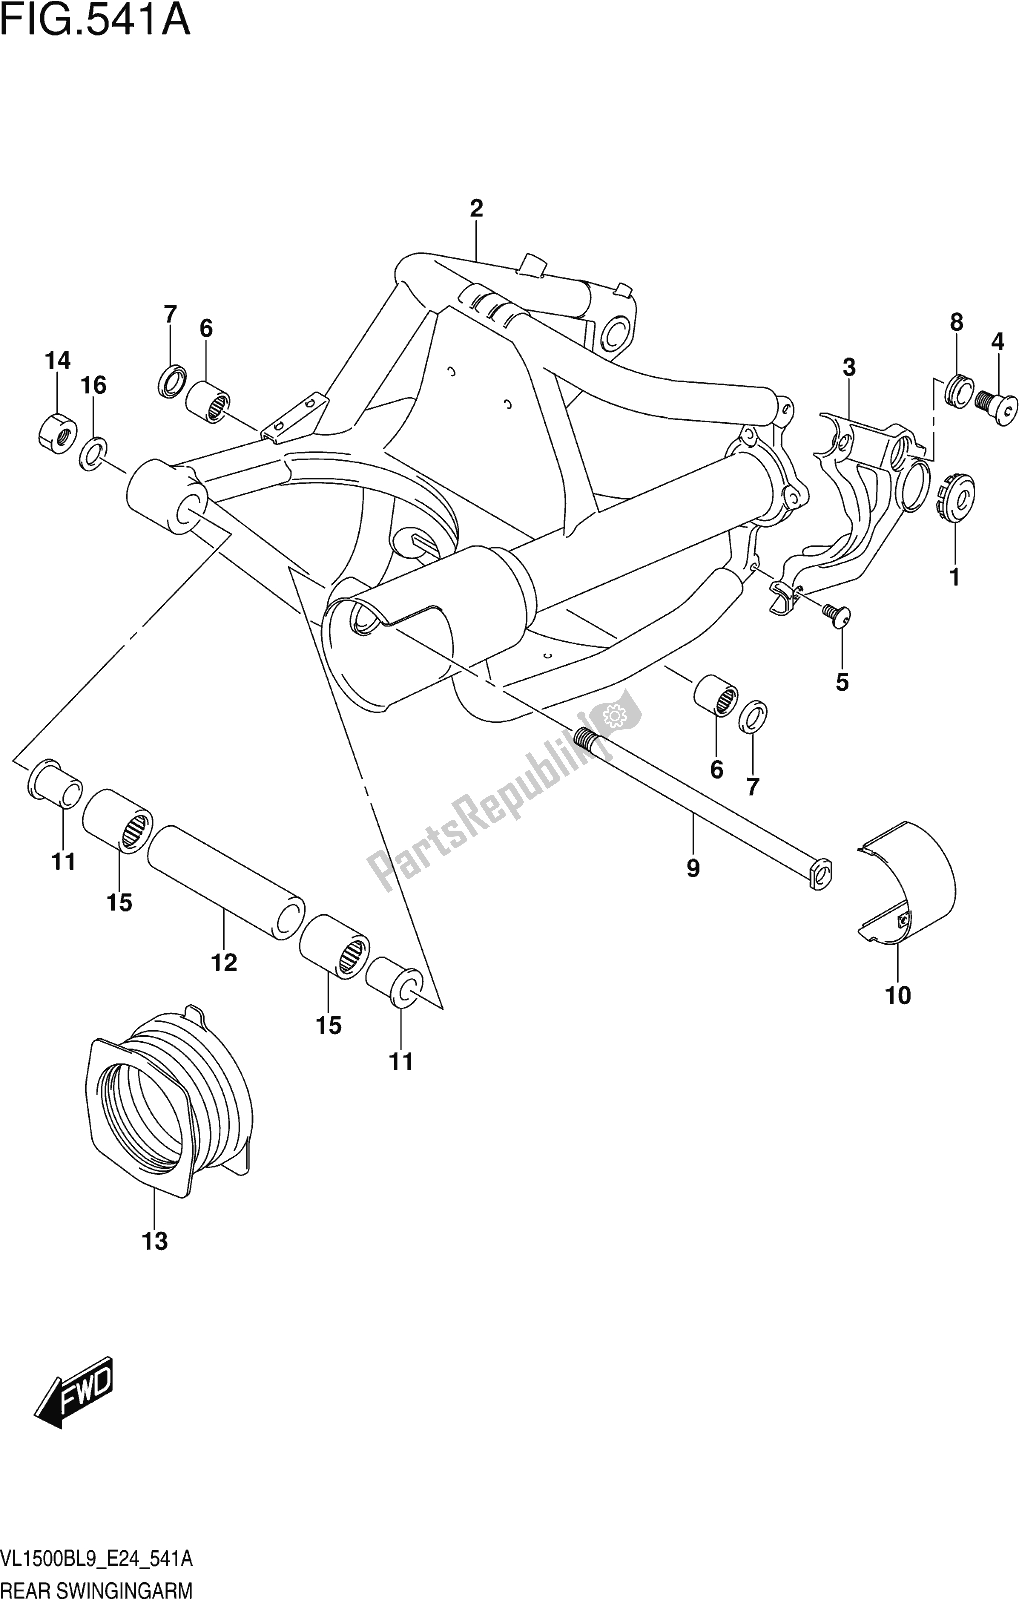 All parts for the Fig. 541a Rear Swingingarm of the Suzuki VL 1500B 2019